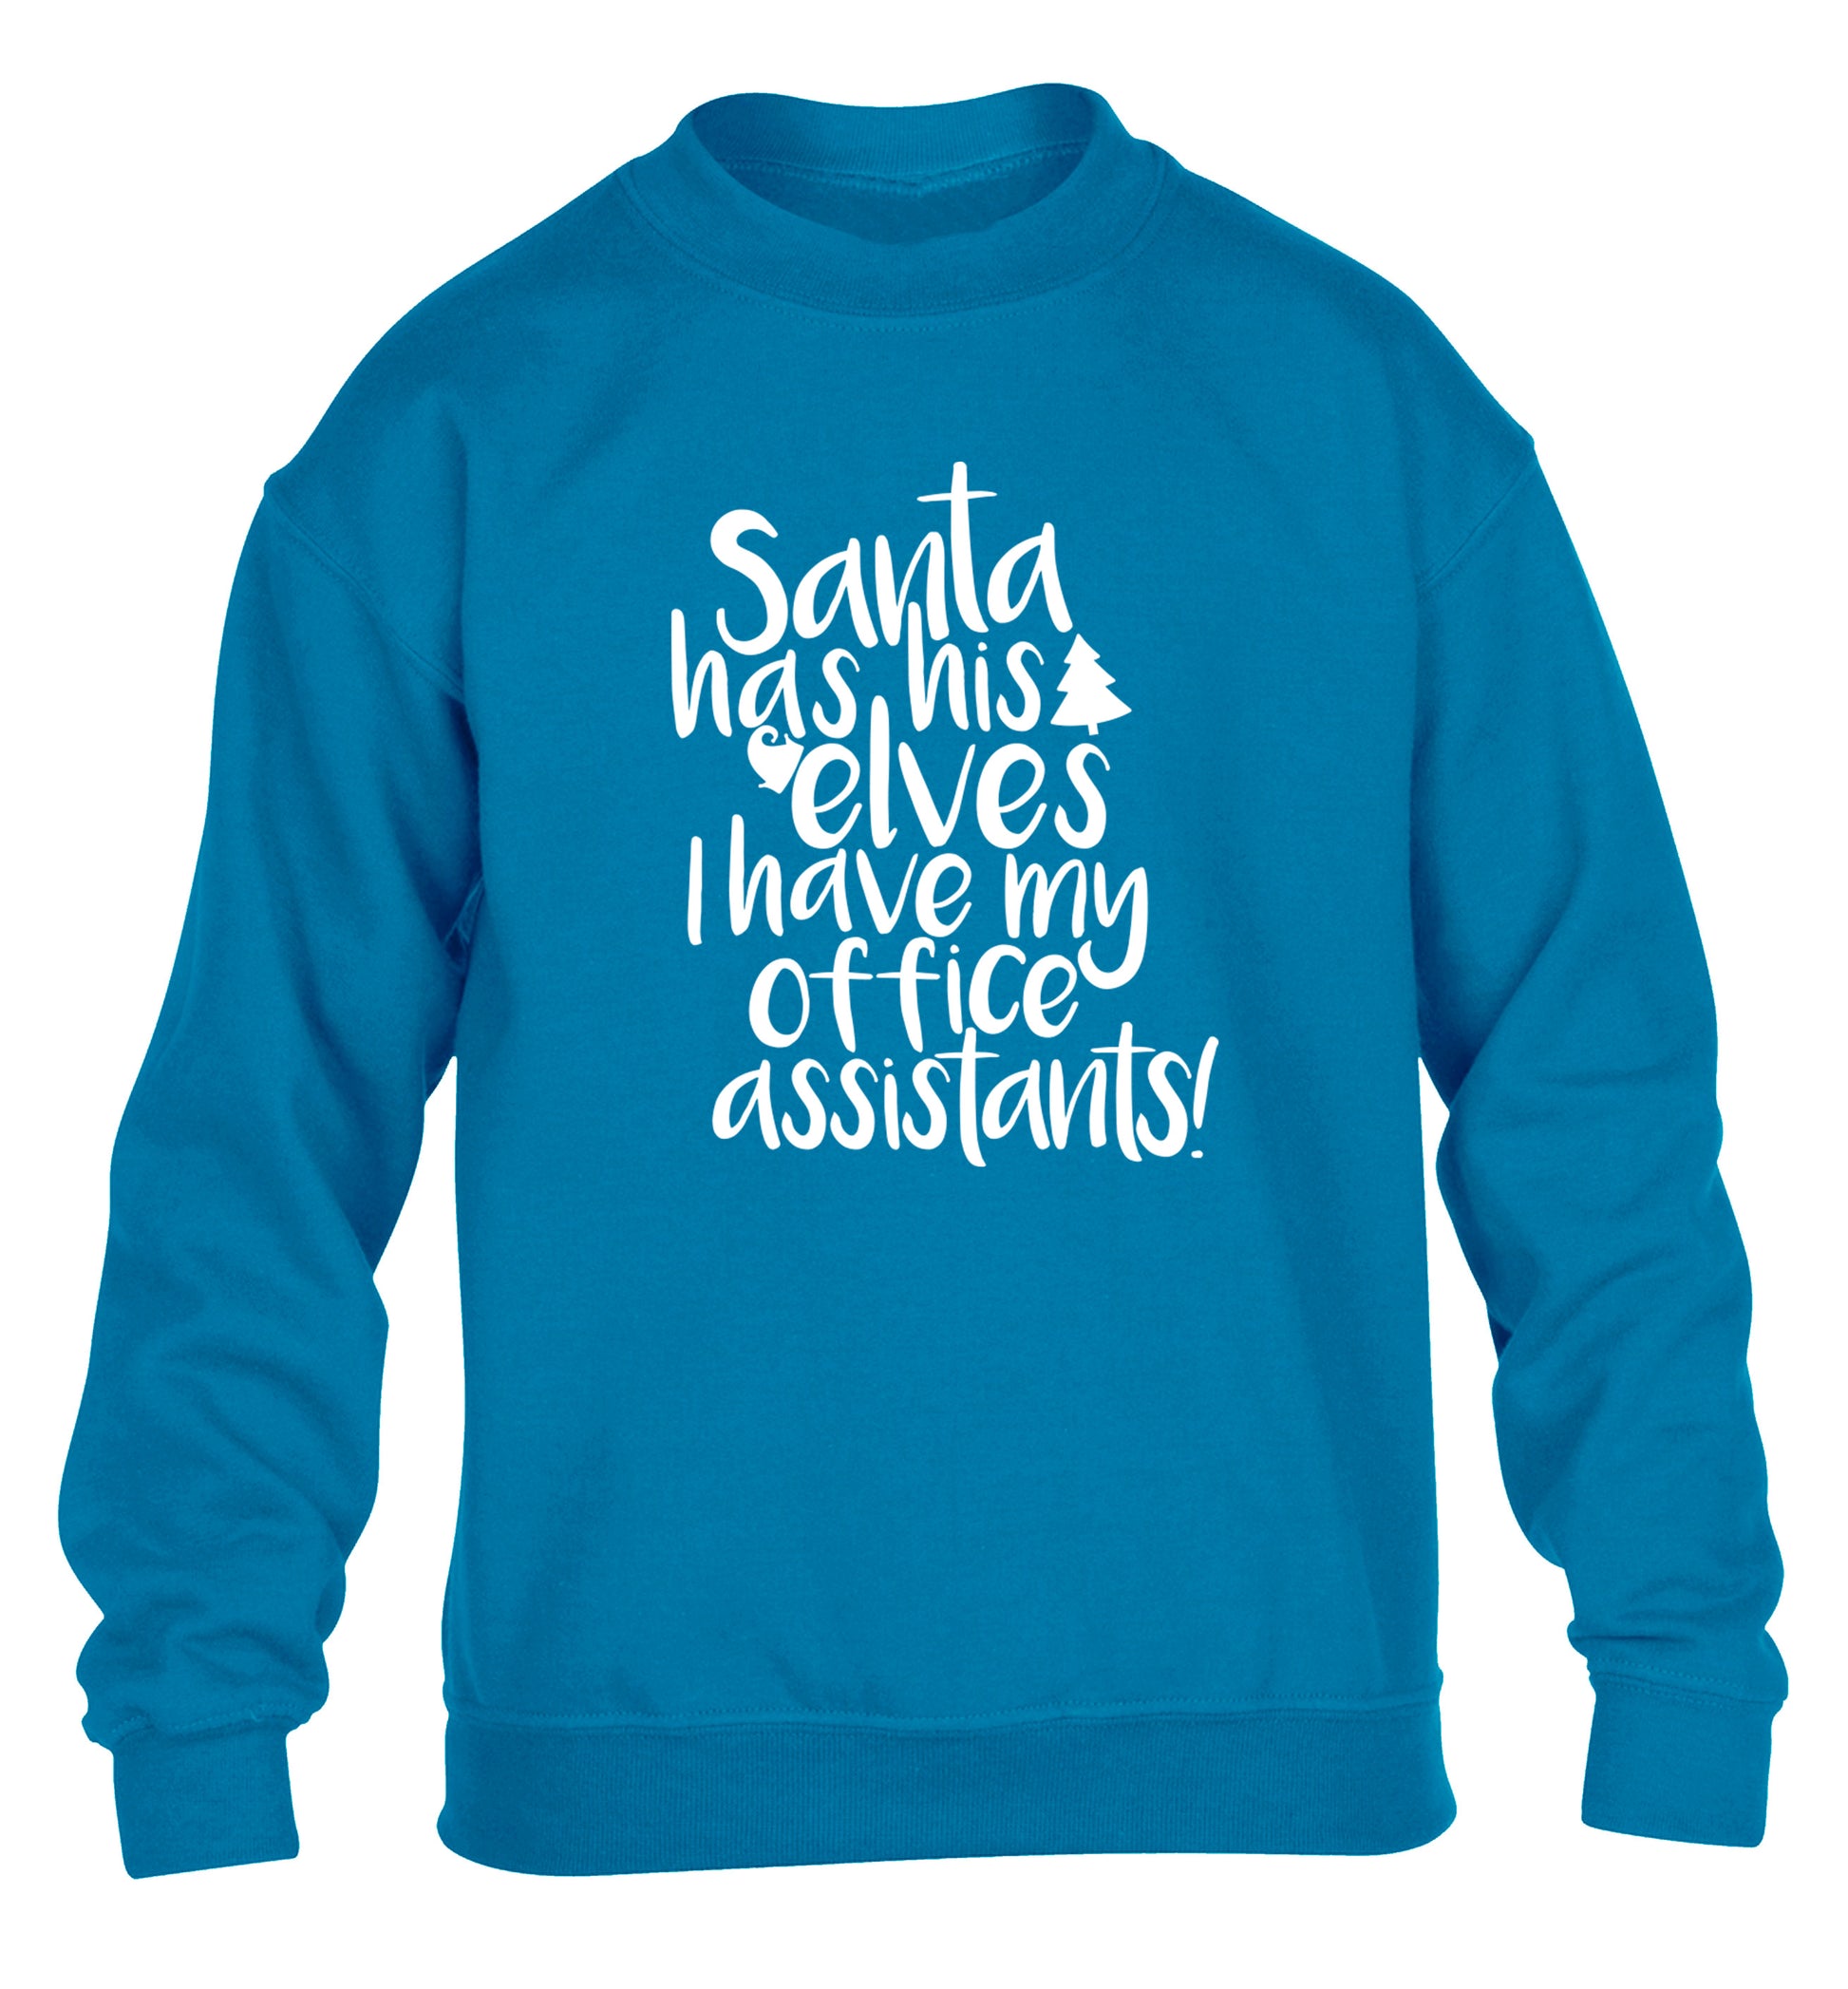 Santa has elves I have office assistants children's blue sweater 12-13 Years